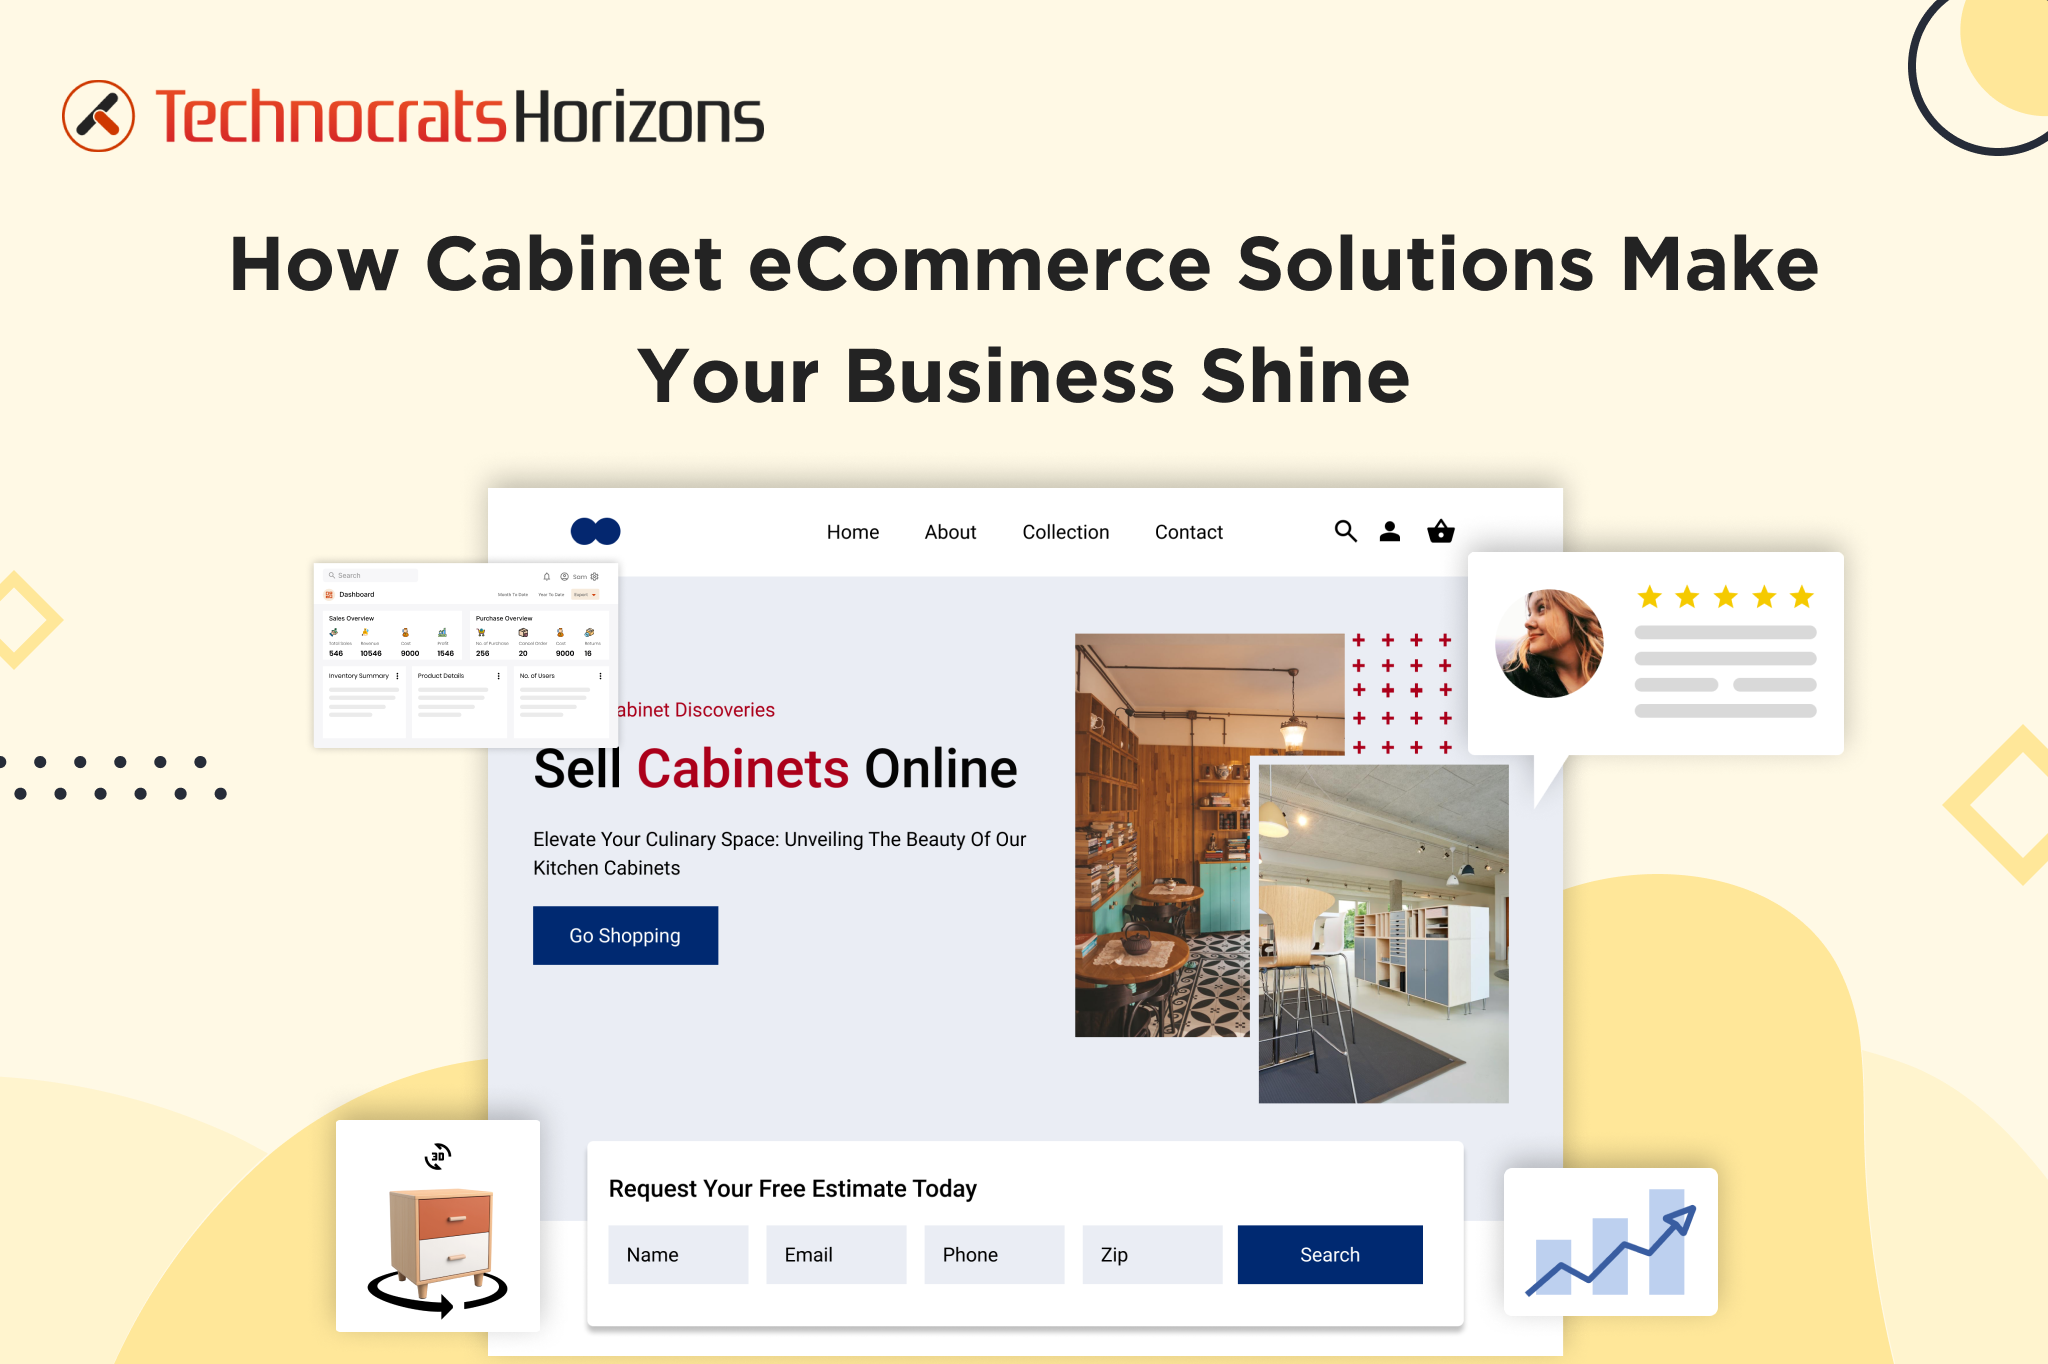 Advantages of Cabinet eCommerce Solutions: How To Stand Out From the Competition